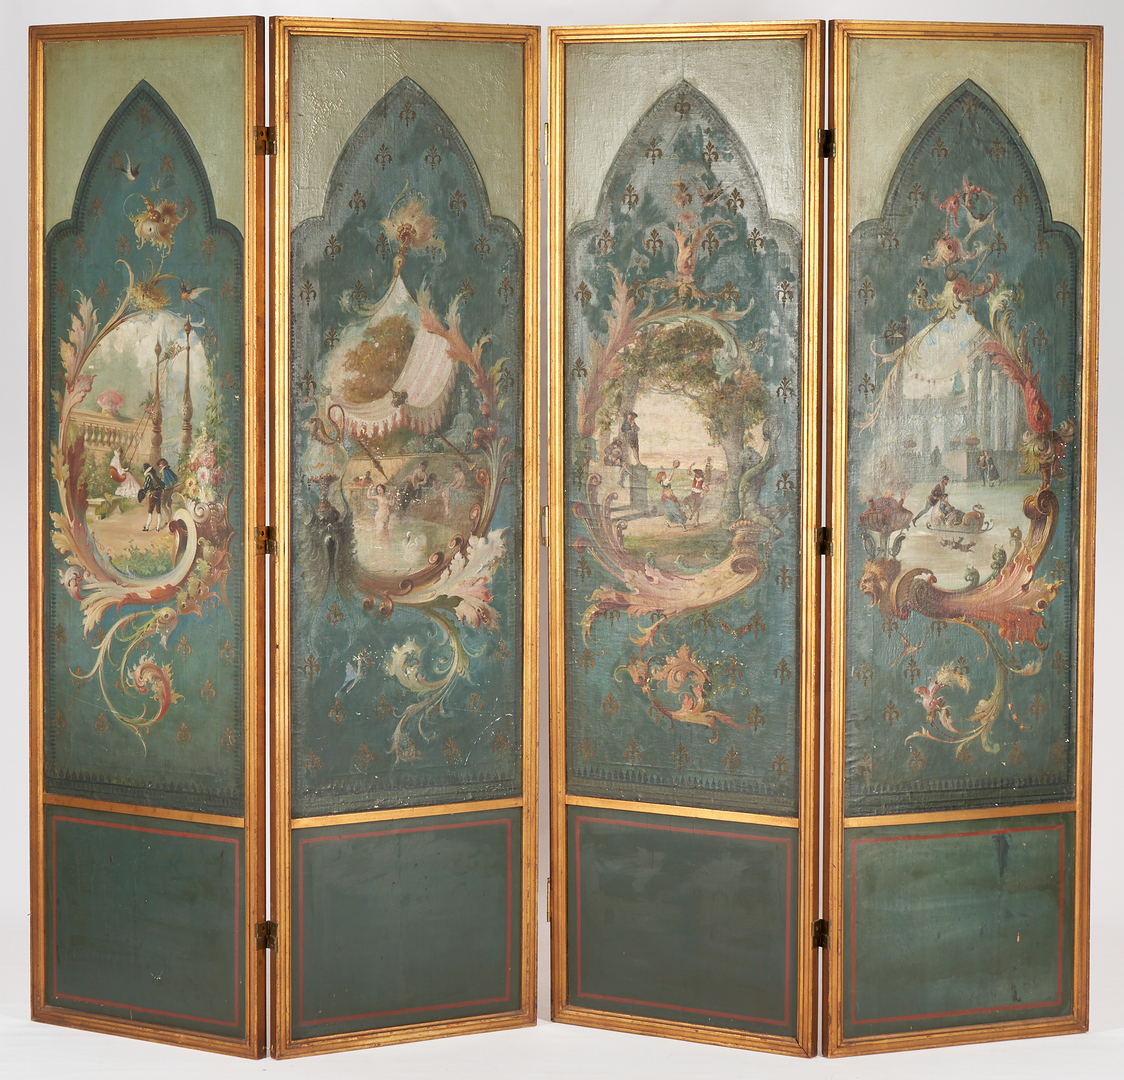 Lot 242: 4 Panel Hand Painted French Screen